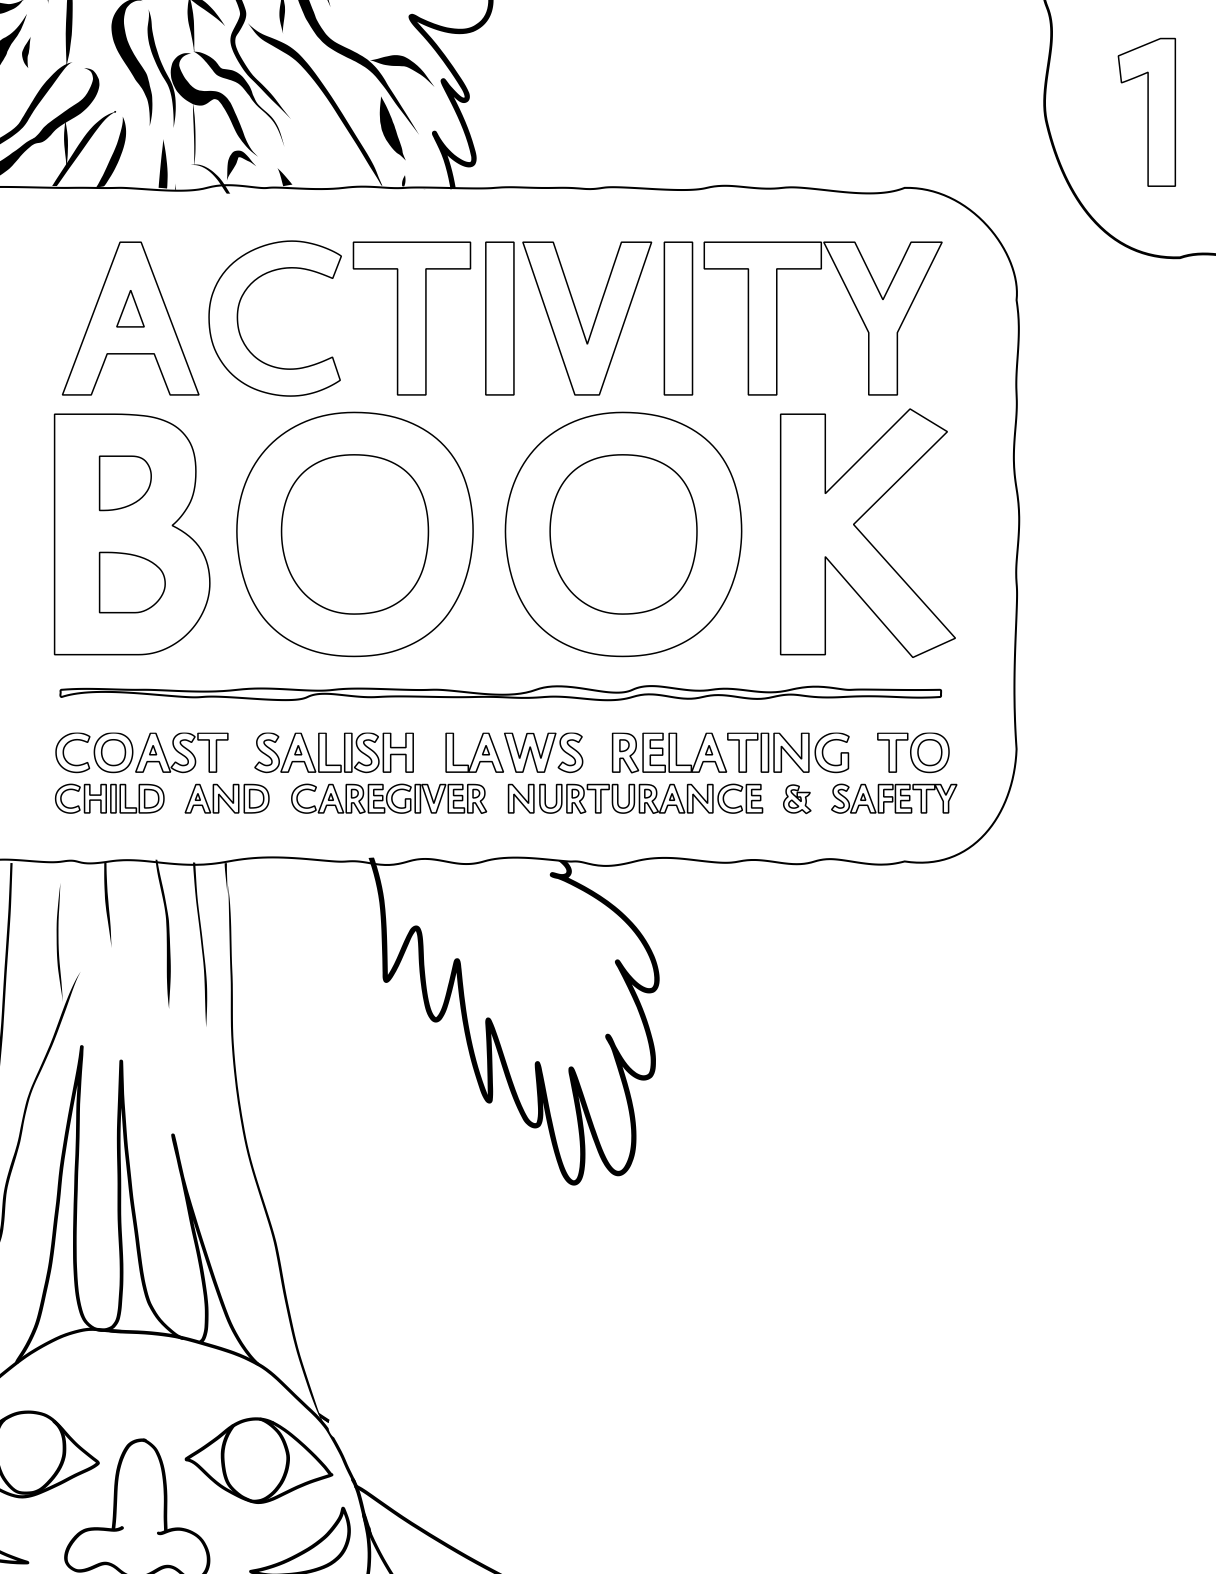 Activity Book 1: Coast Salish Laws Relating to Child & Caregiver Nurturance & Safety Cover with Bradley Dick's Tree Image (colouring book version)